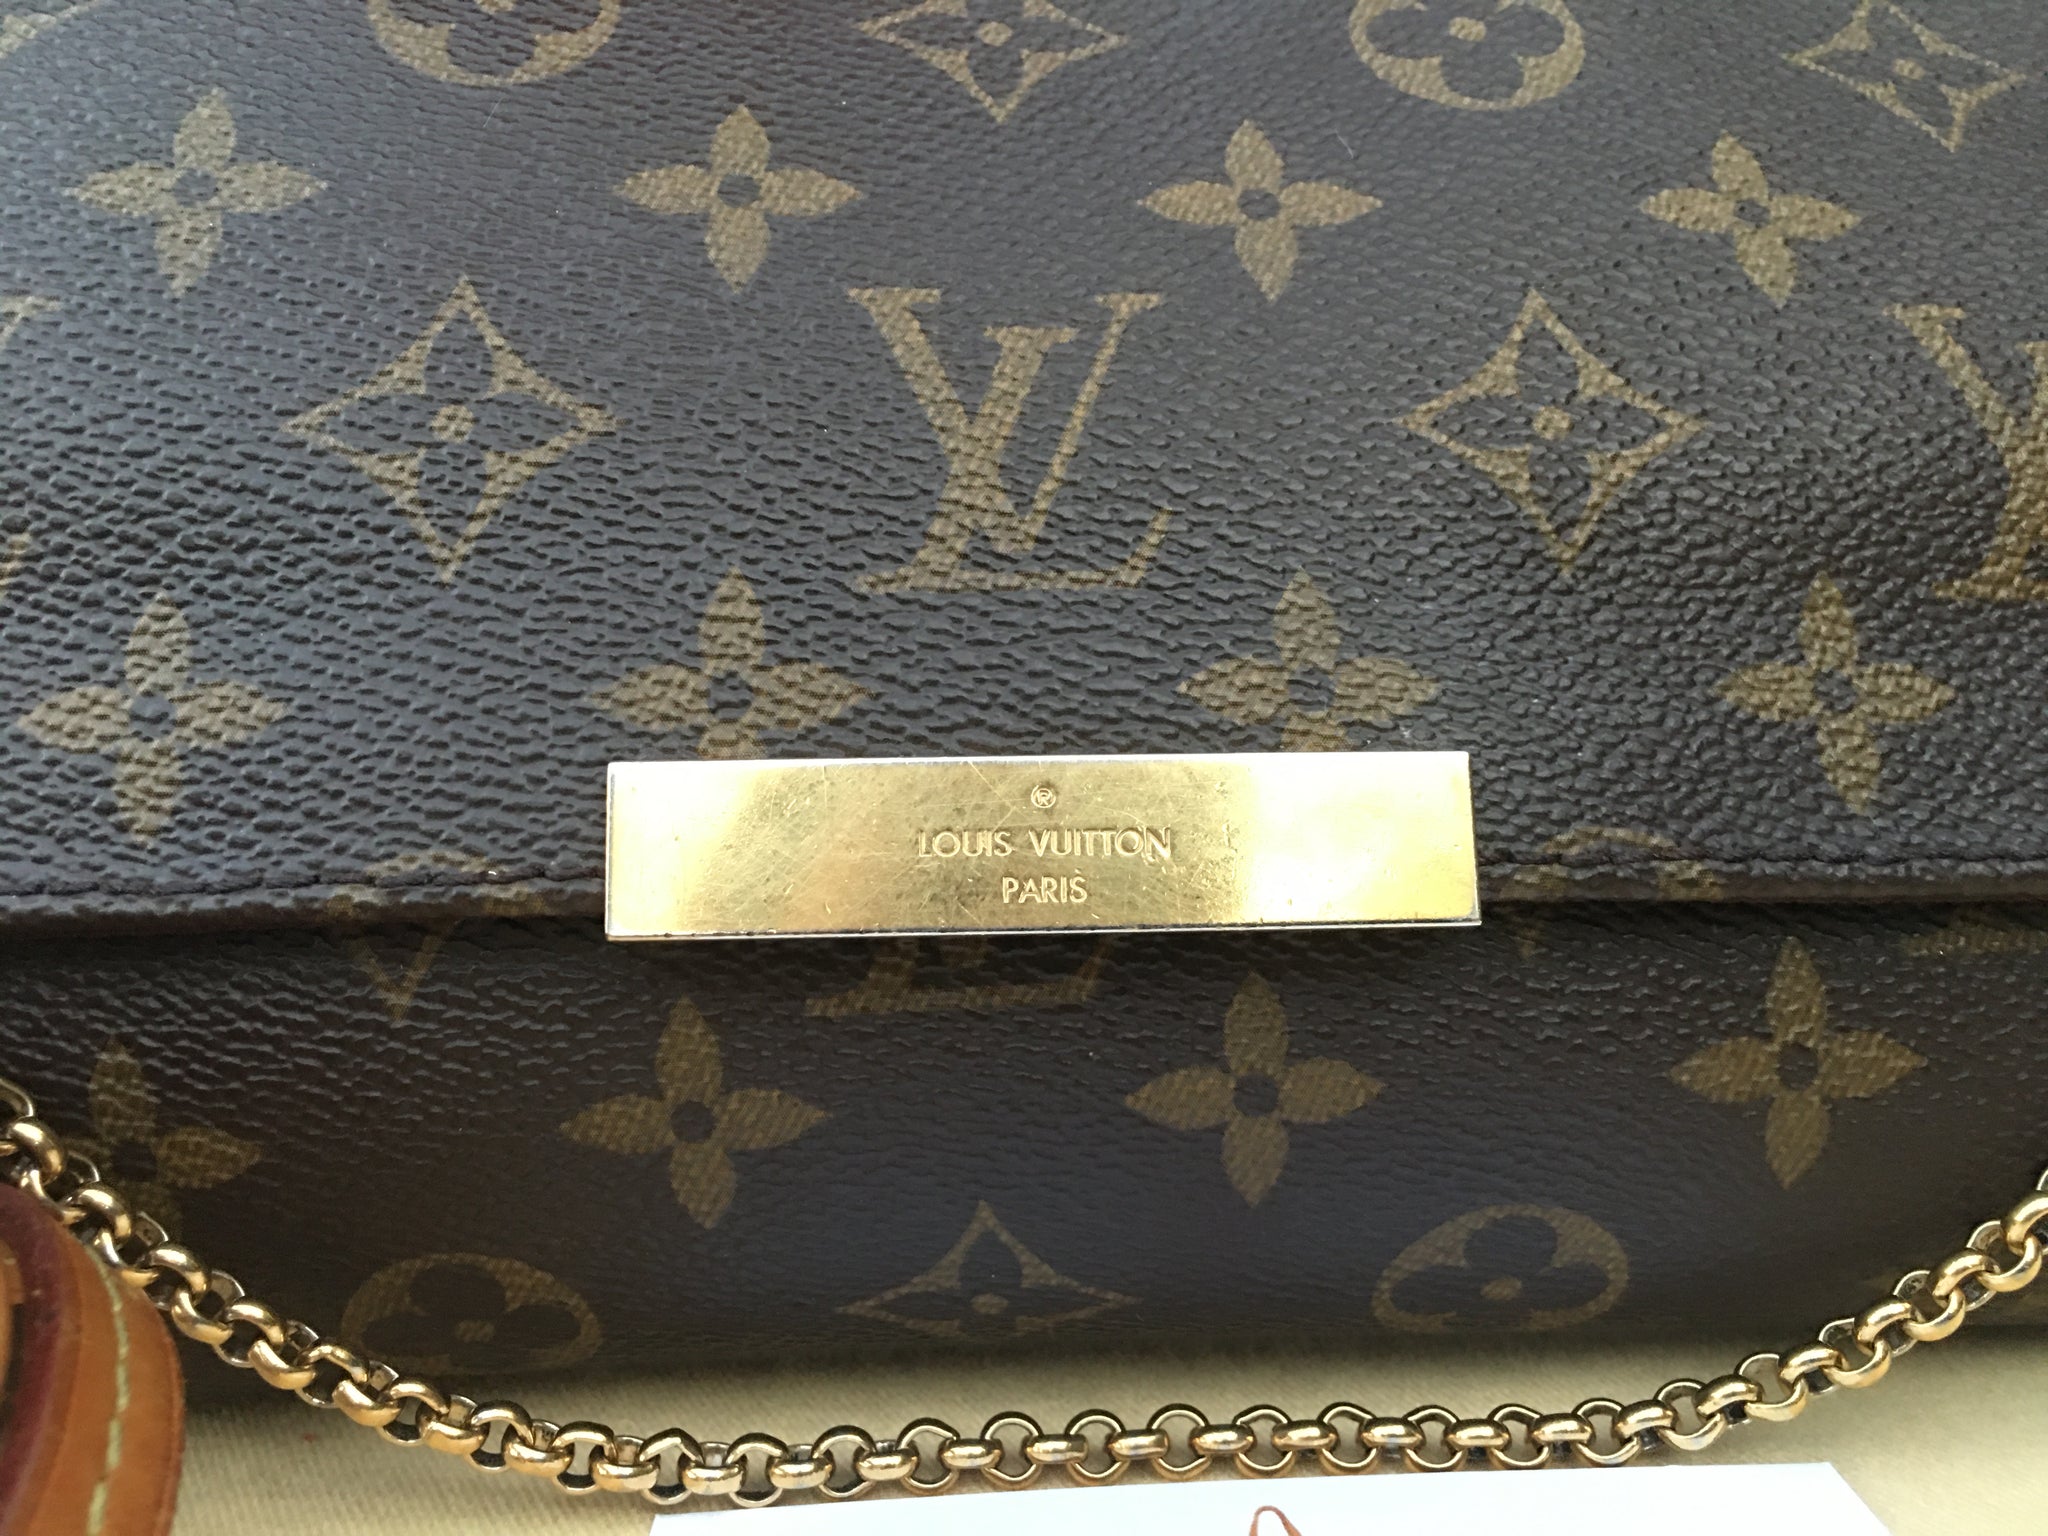 ❤️SOLD) Louis Vuitton Monogram Favorite MM is on the website for